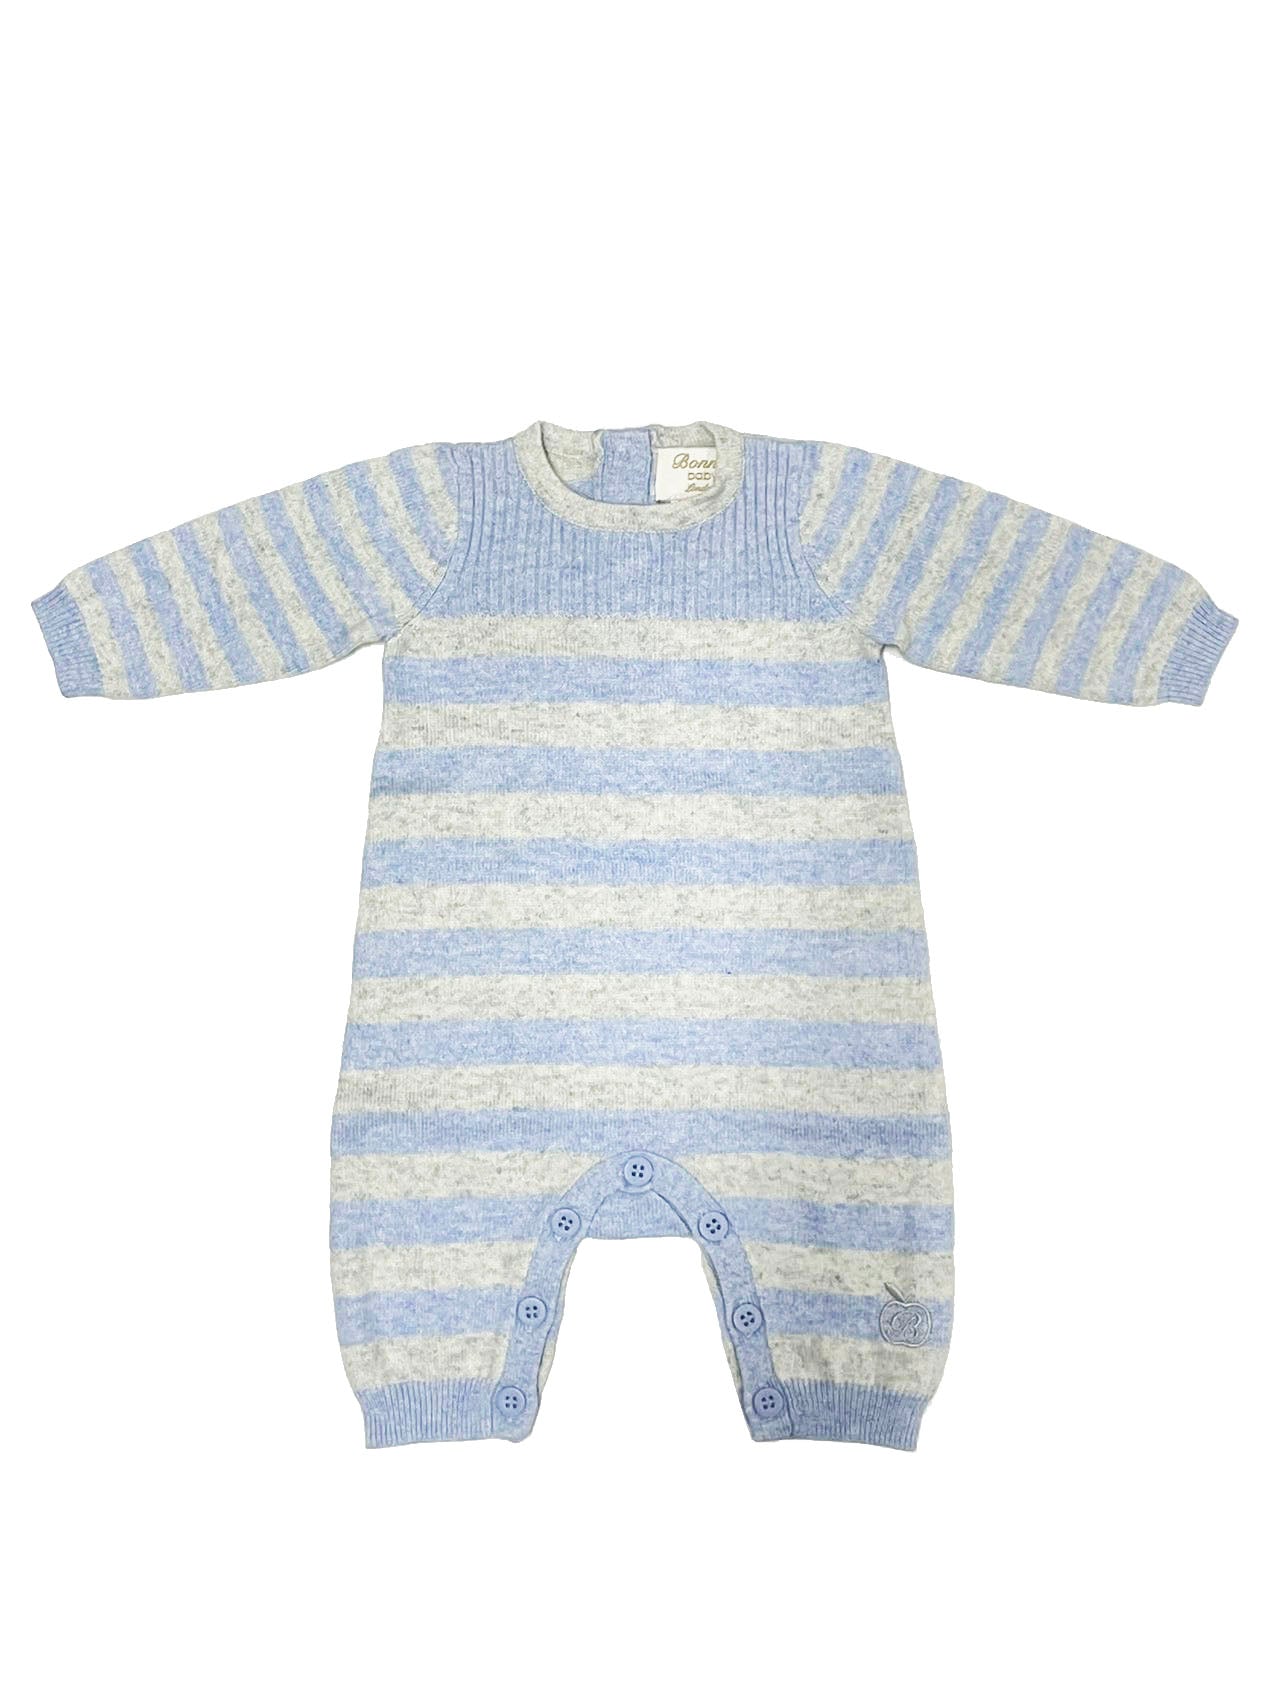 PLAYSUIT - BABY - 3 COLOR (PINK/BLUE/GREY) - S'ME